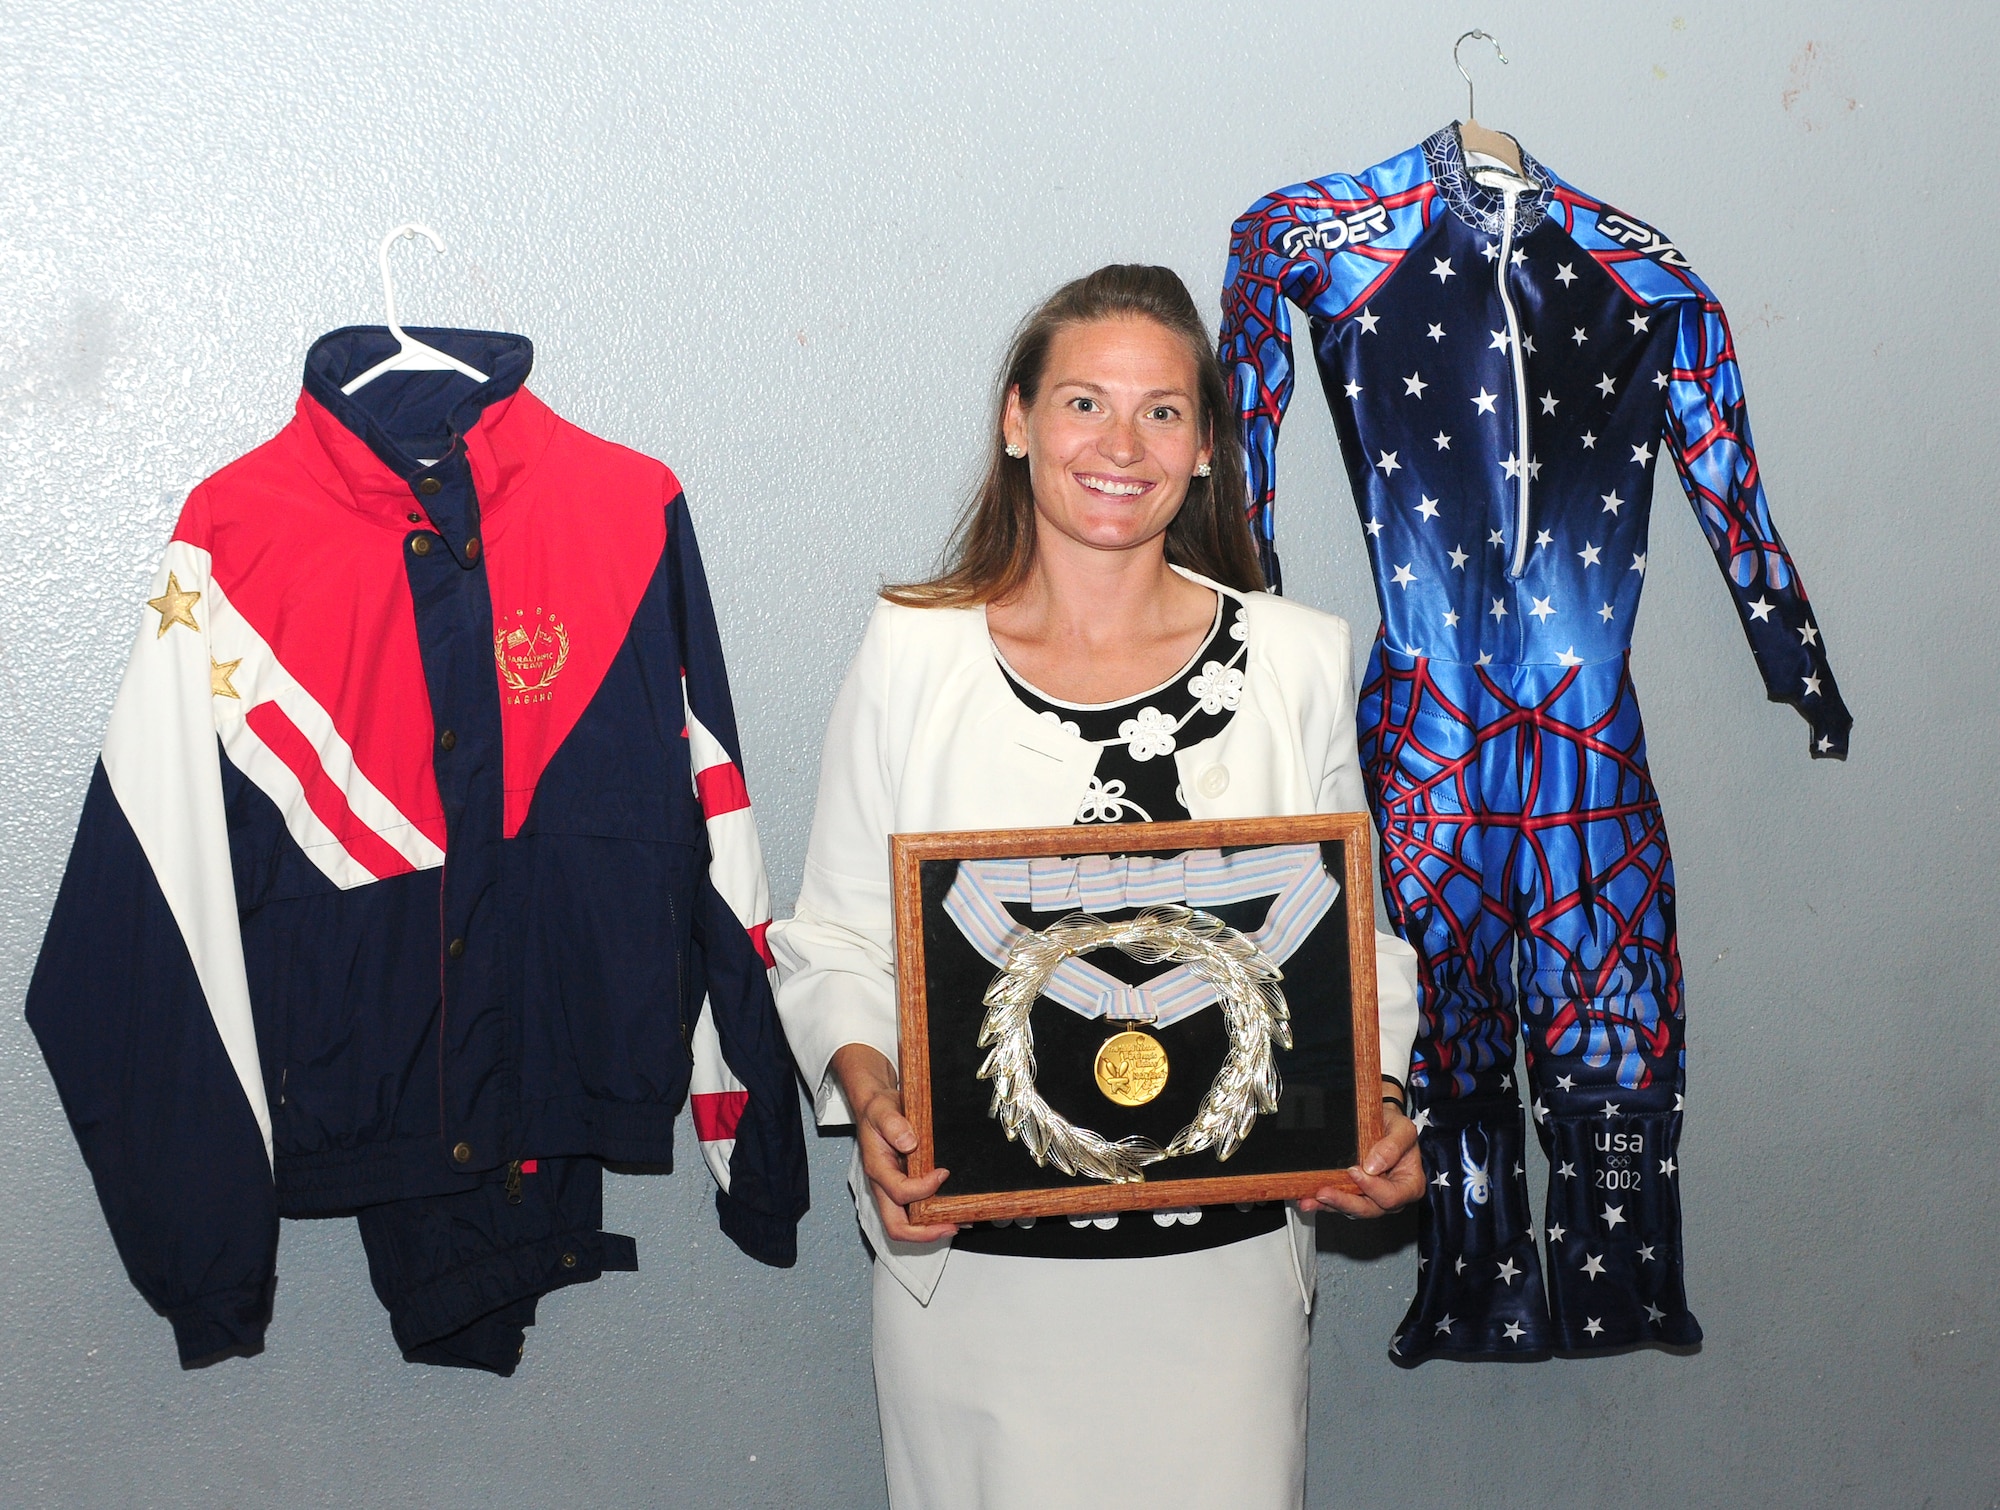 Jennifer Kelchner, a Paralympics gold medalist poses for a photo with her gold medal and her Olympic uniforms at the Youth Center at Beale Air Force Base, Calif., June 27, 2012. Kelchner also won the bronze medal for the slalom skiing event at the 2002 Winter Olympics in Salt Lake City, Utah. (U.S. Air Force photo by Senior Airman Allen Pollard)